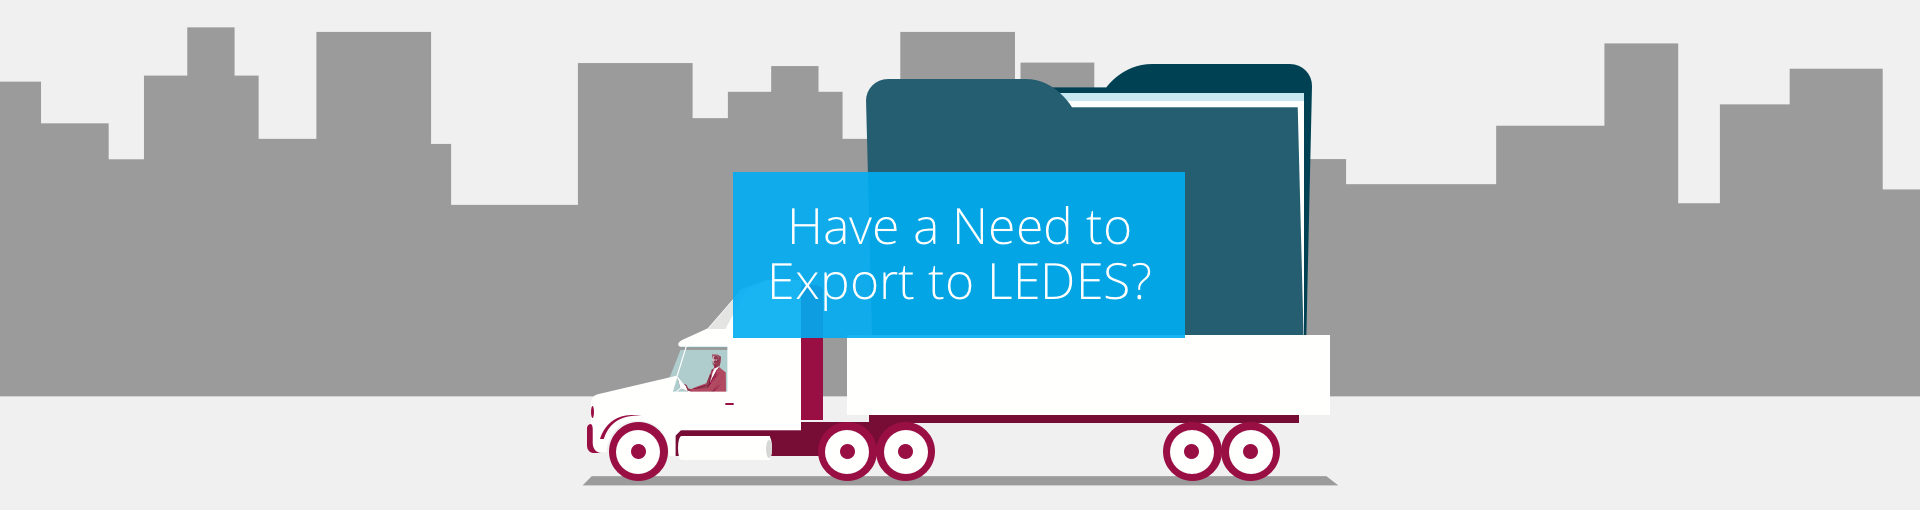 Have a Need to Export to LEDES? Featured Image